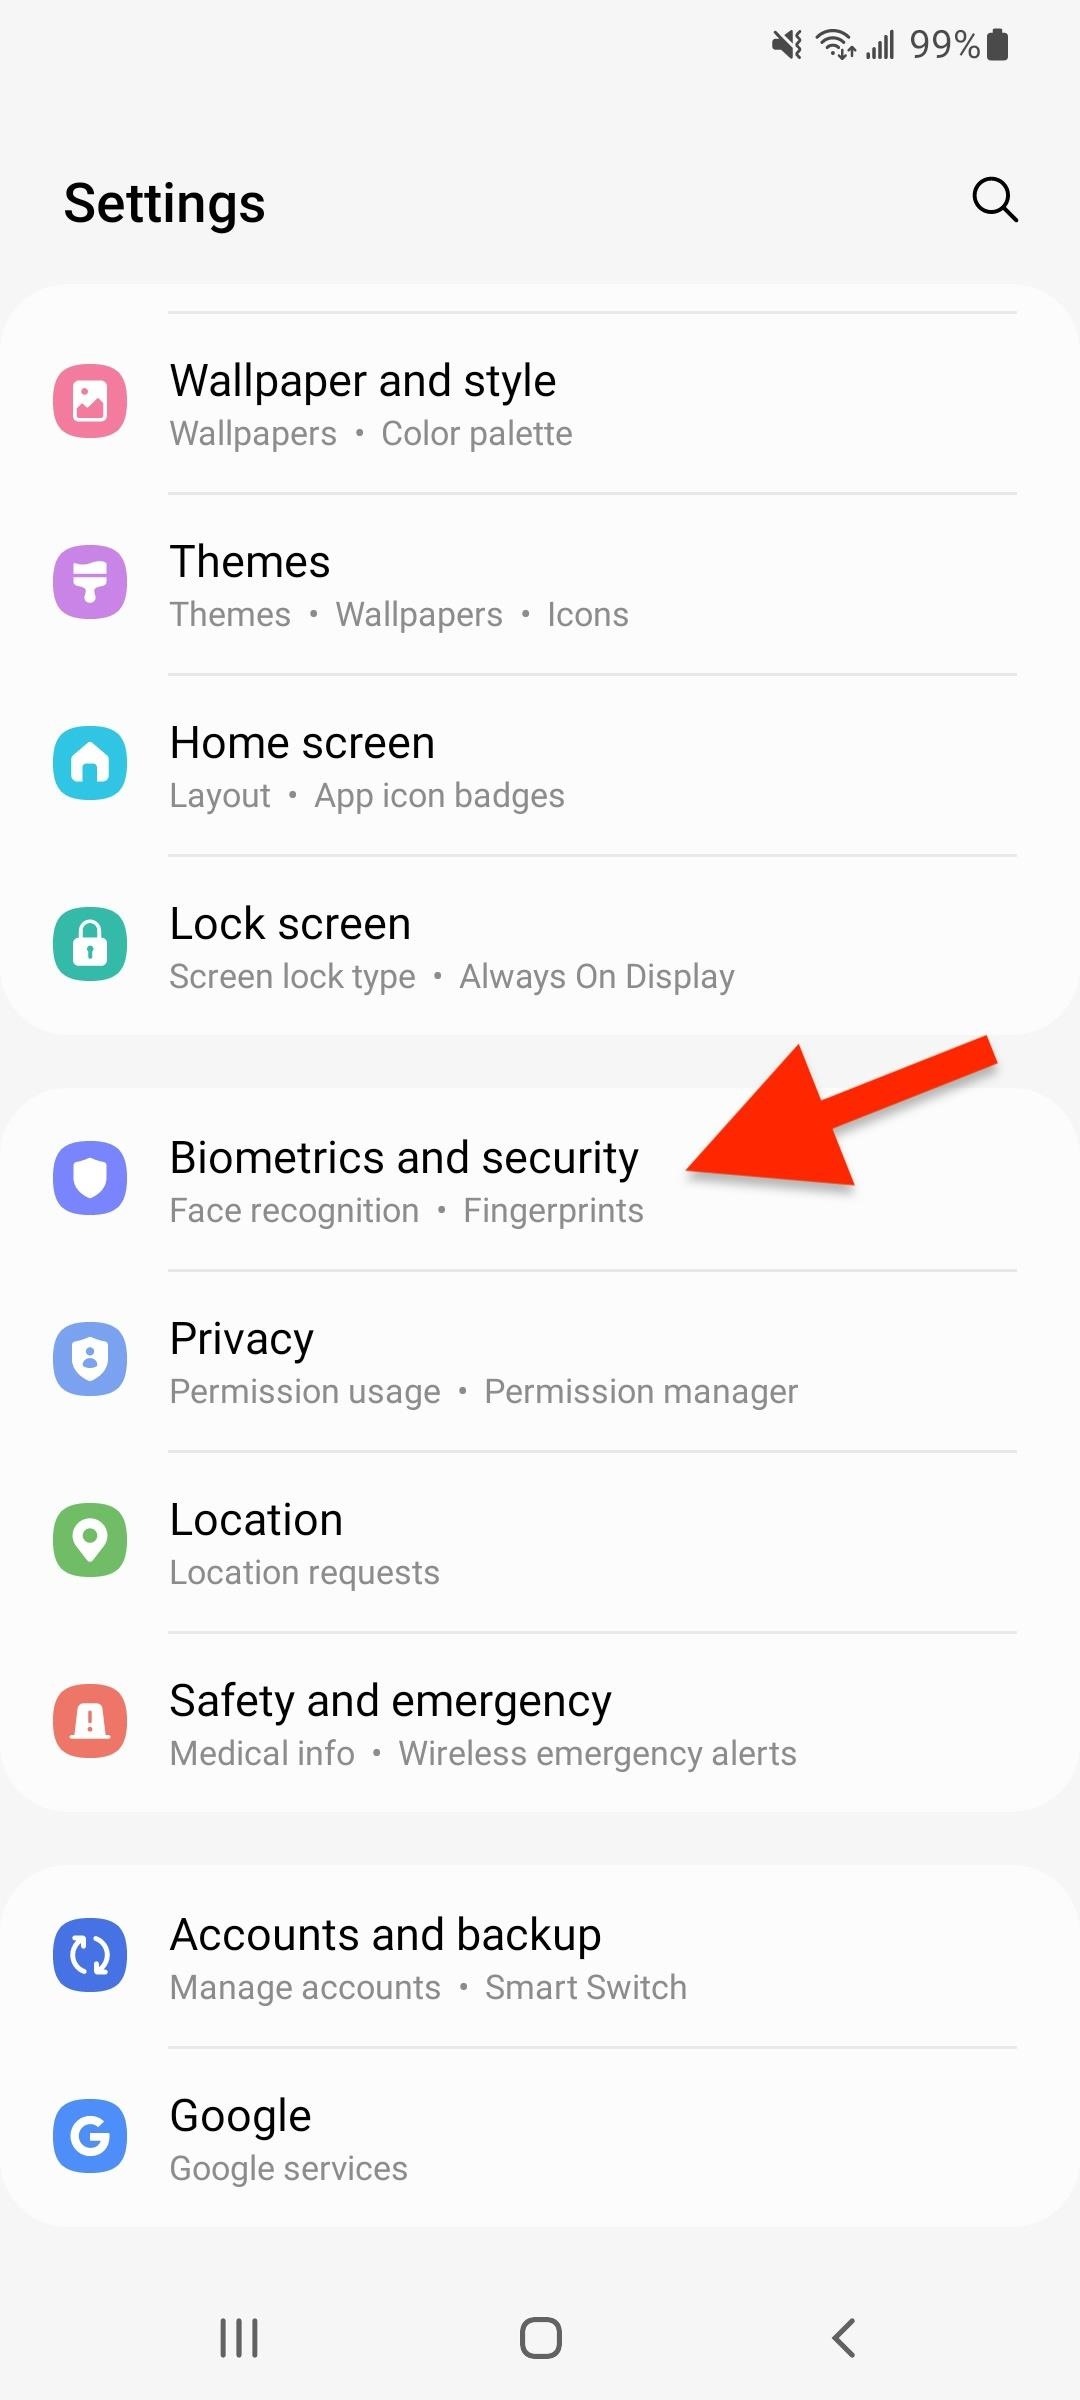 Activate Your Samsung Galaxy's Vault to Keep Your Apps, Files, and History Safe from Prying Eyes and Hackers